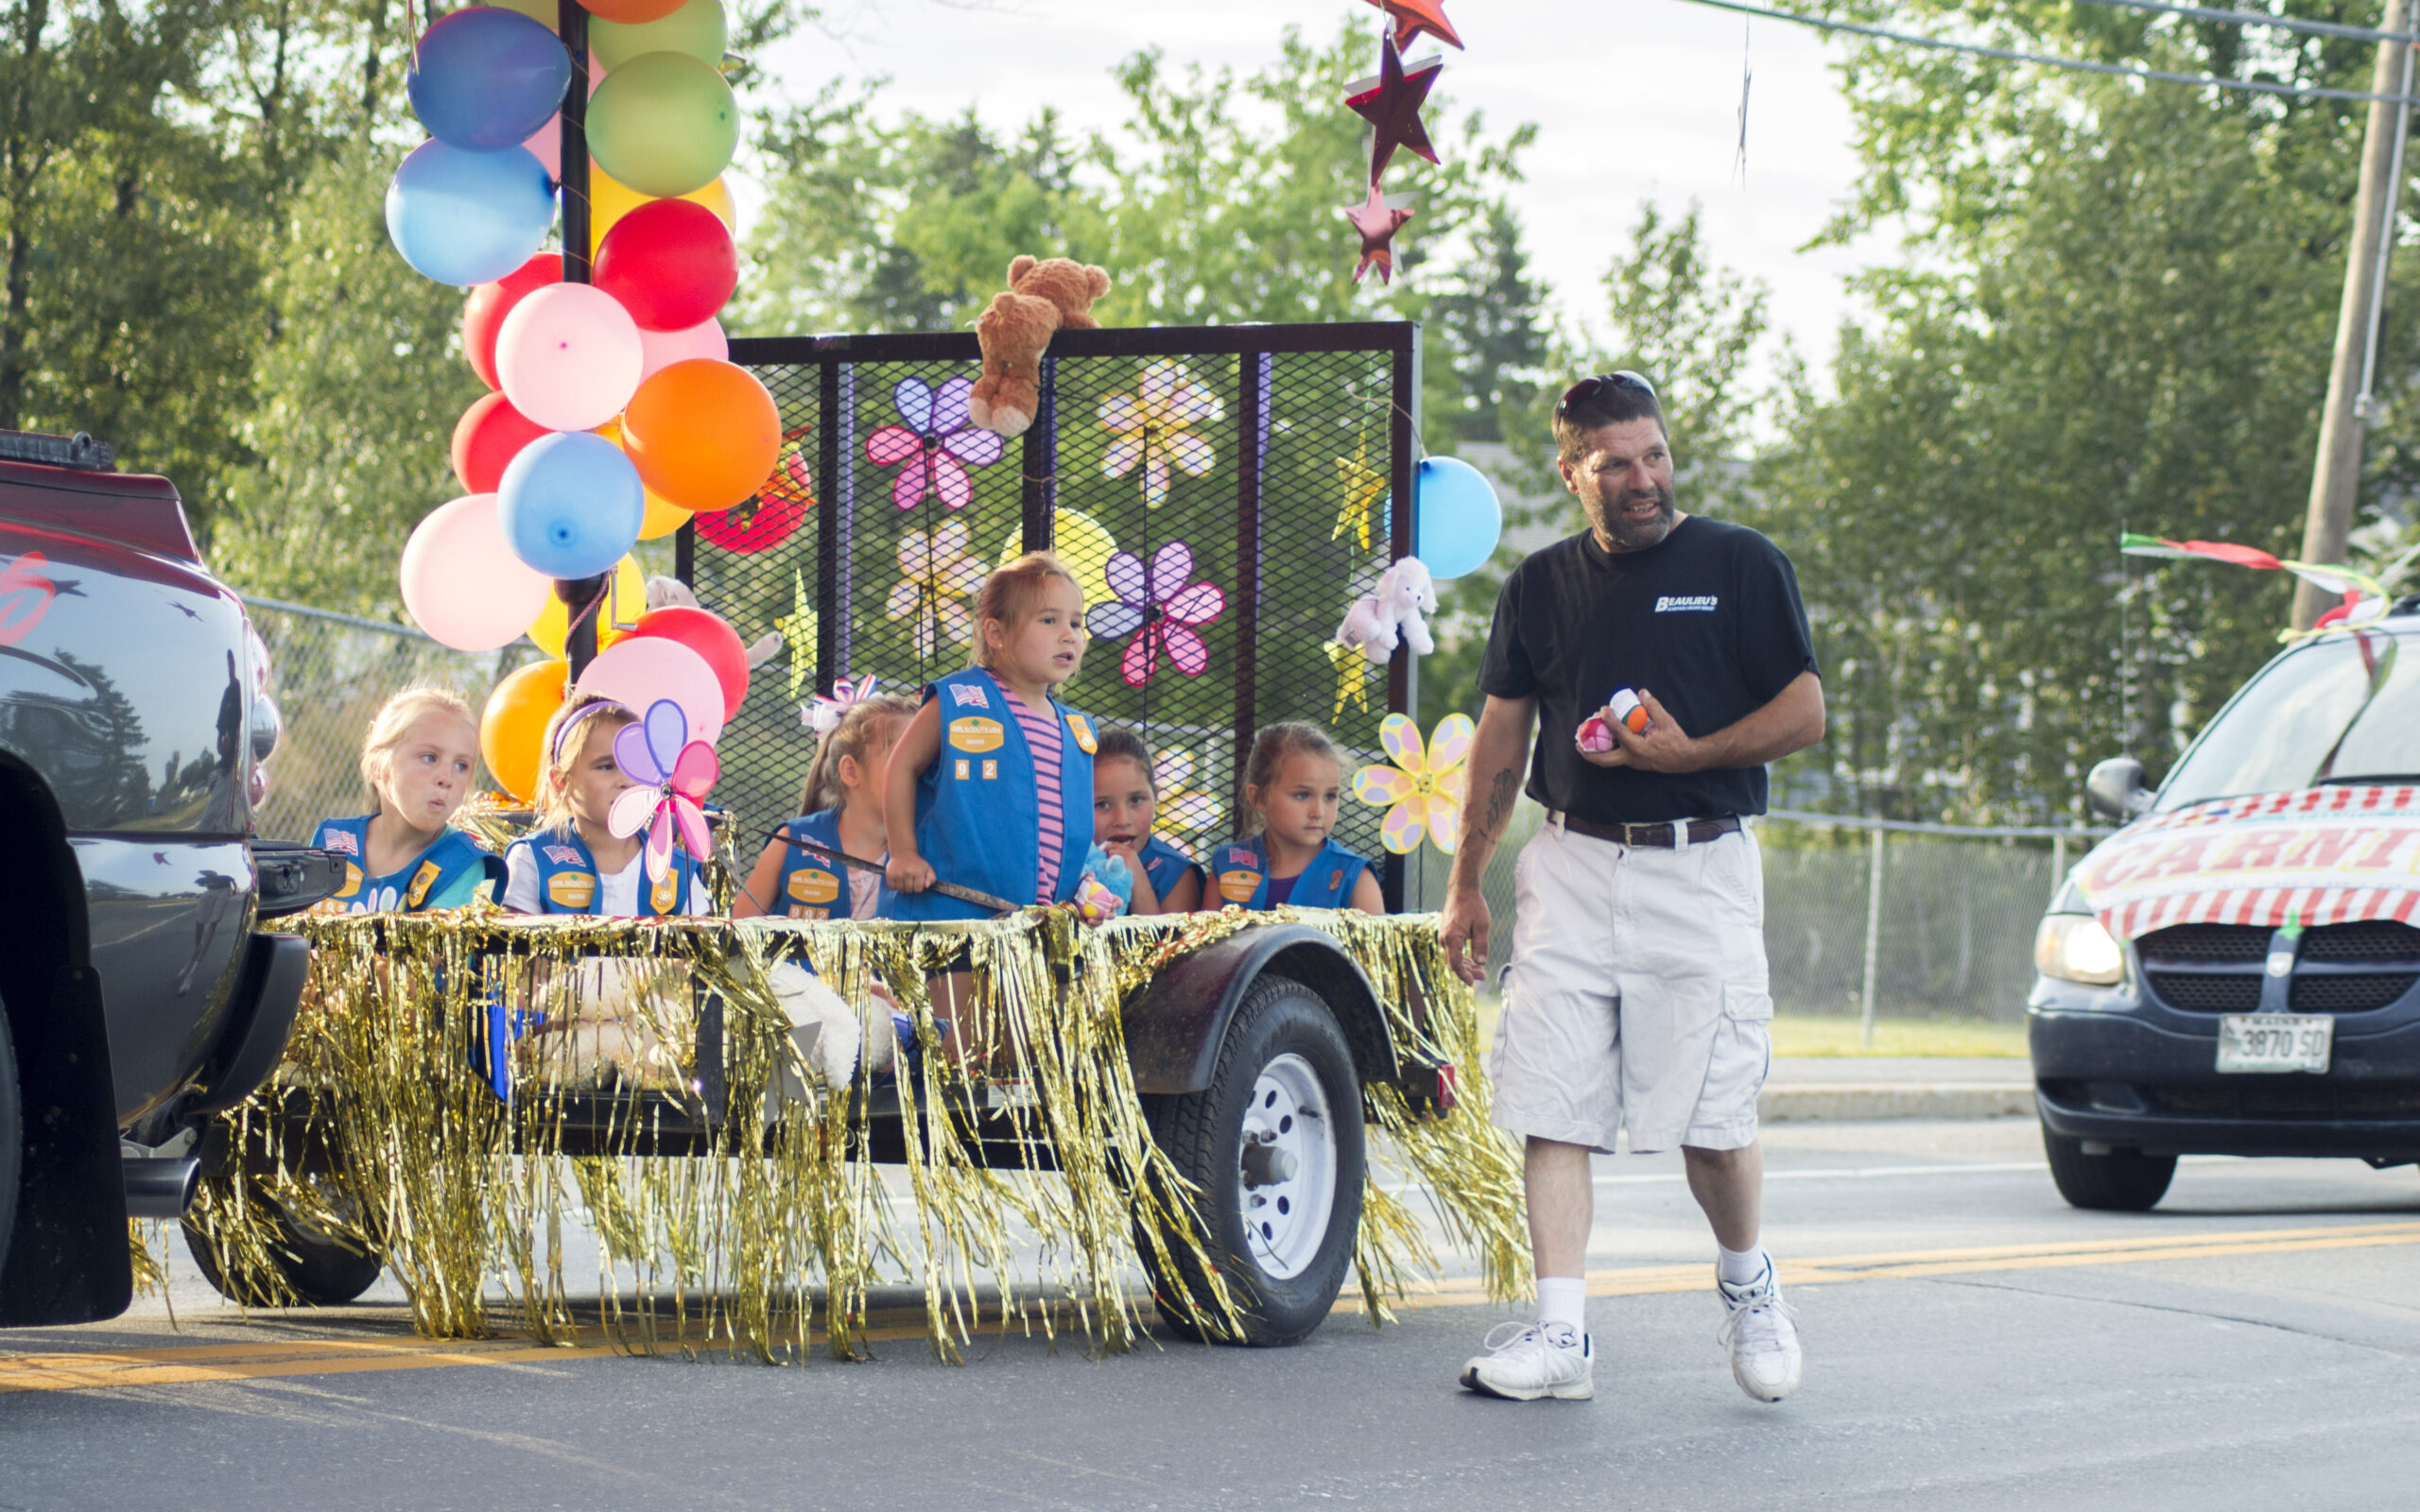 Caribou Cares About Kids parade brings out the community The County